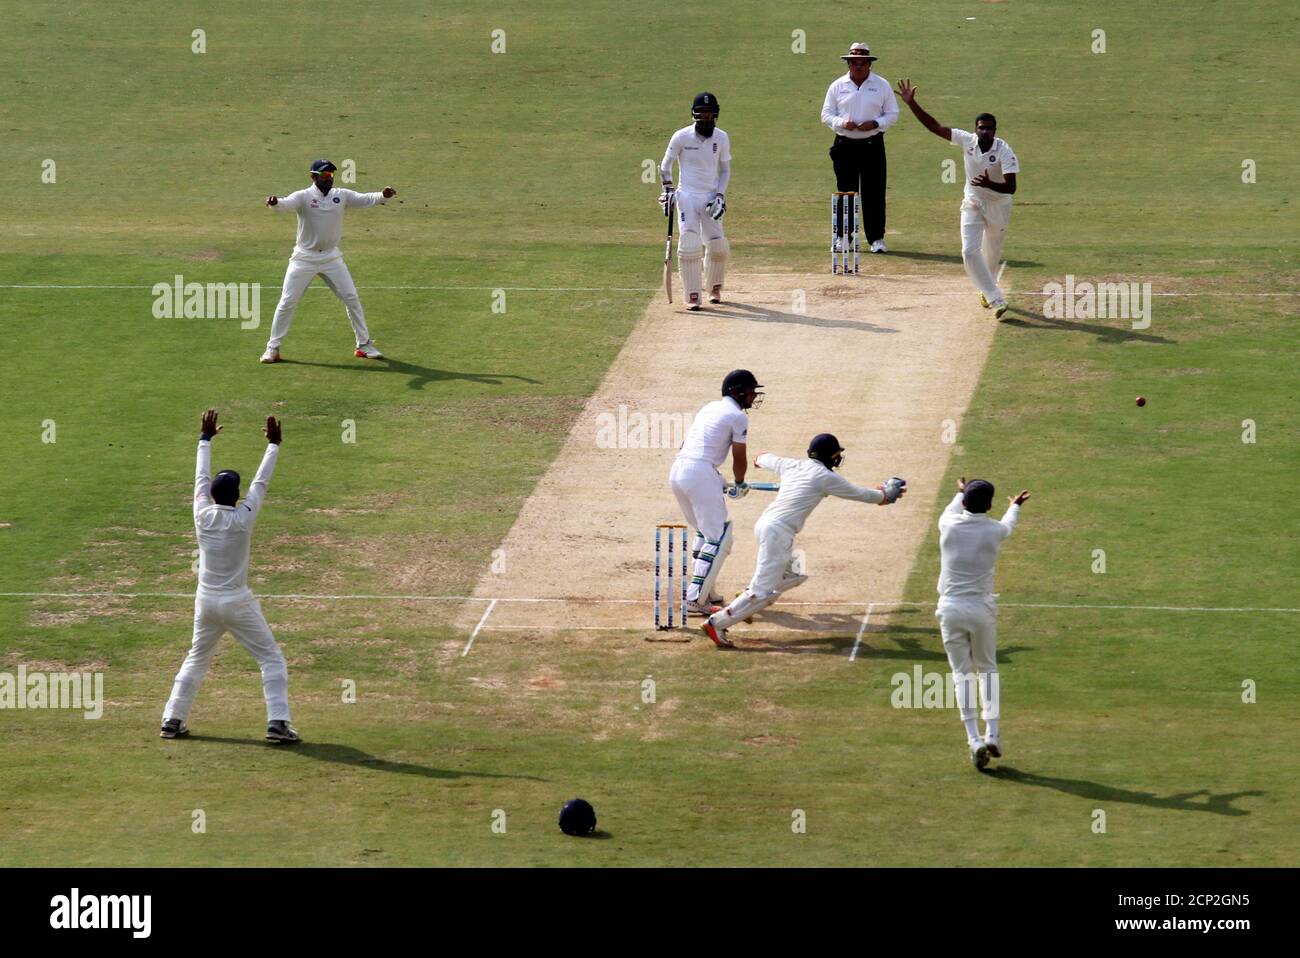 Cricket - India v England - Fifth Test cricket match - M A Chidambaram Stadium, Chennai, India - 17/12/16. India's players appeal for a LBW. REUTERS/Danish Siddiqui Stock Photo